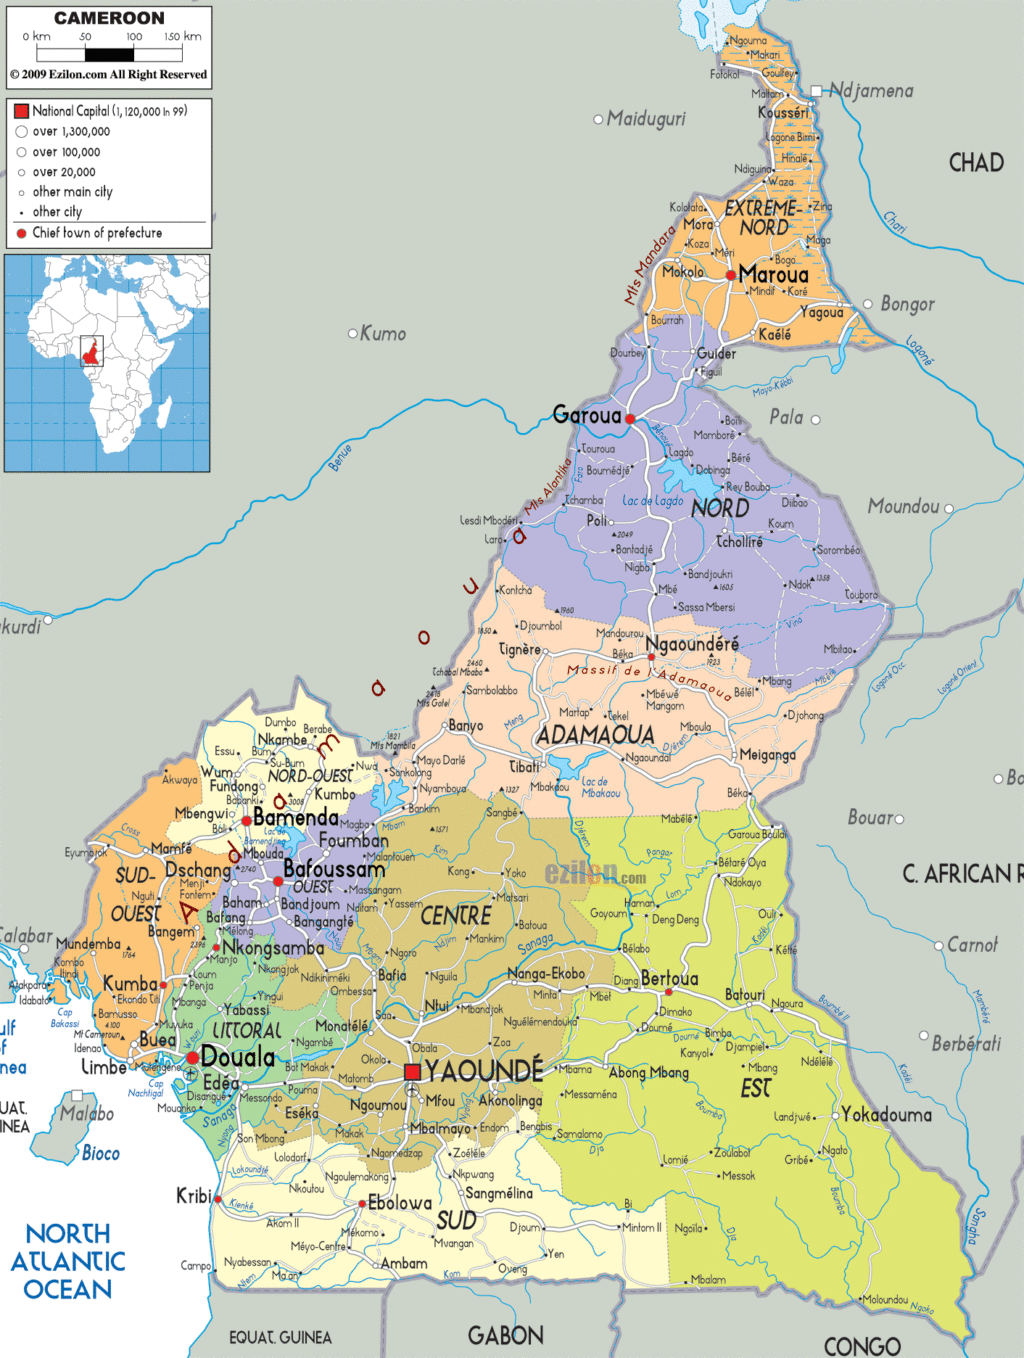 Cameroon political map.